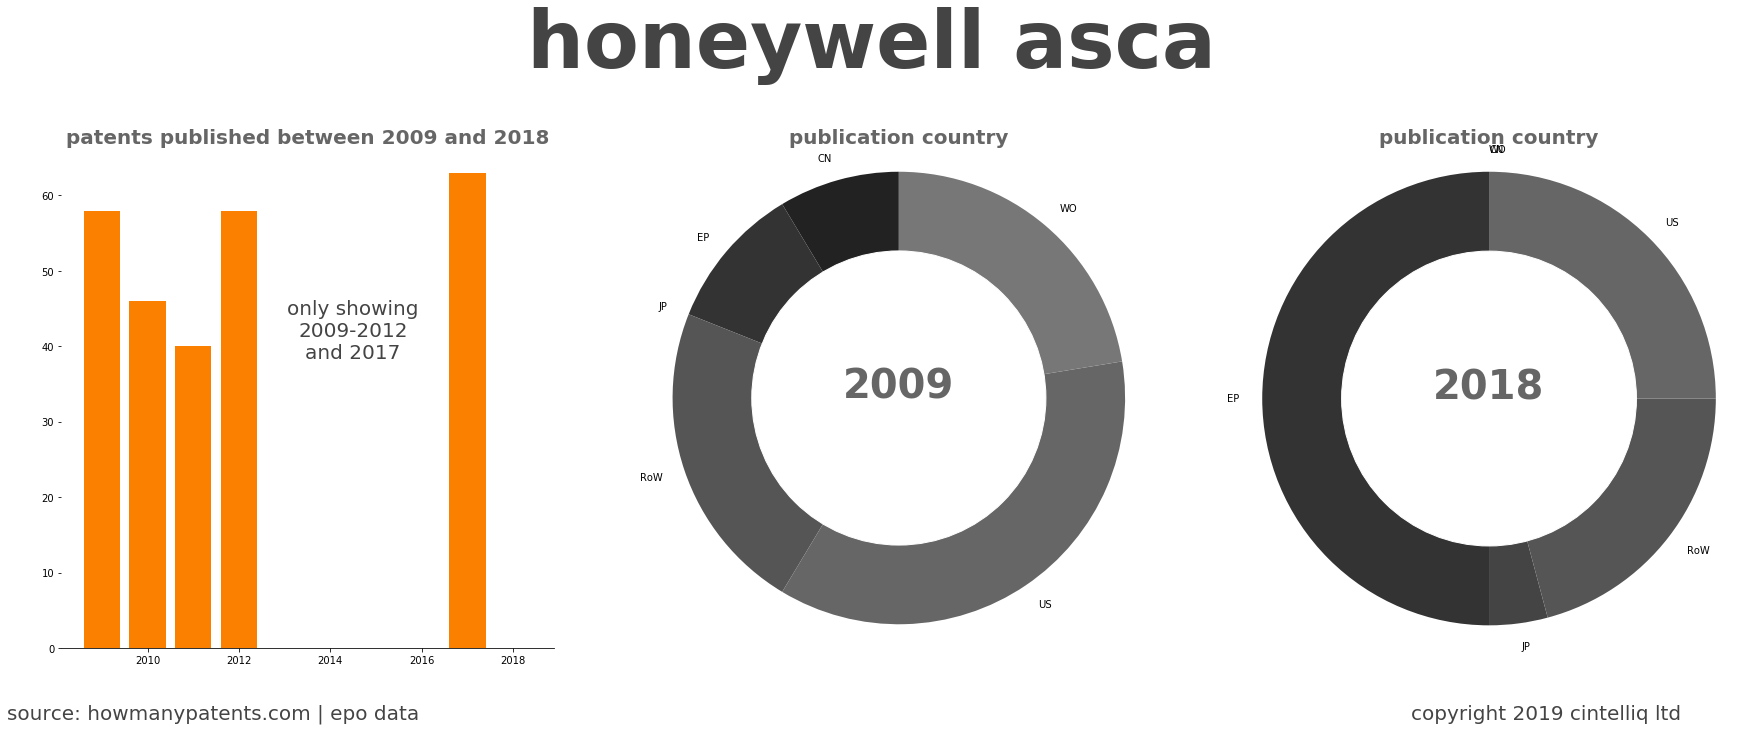 summary of patents for Honeywell Asca